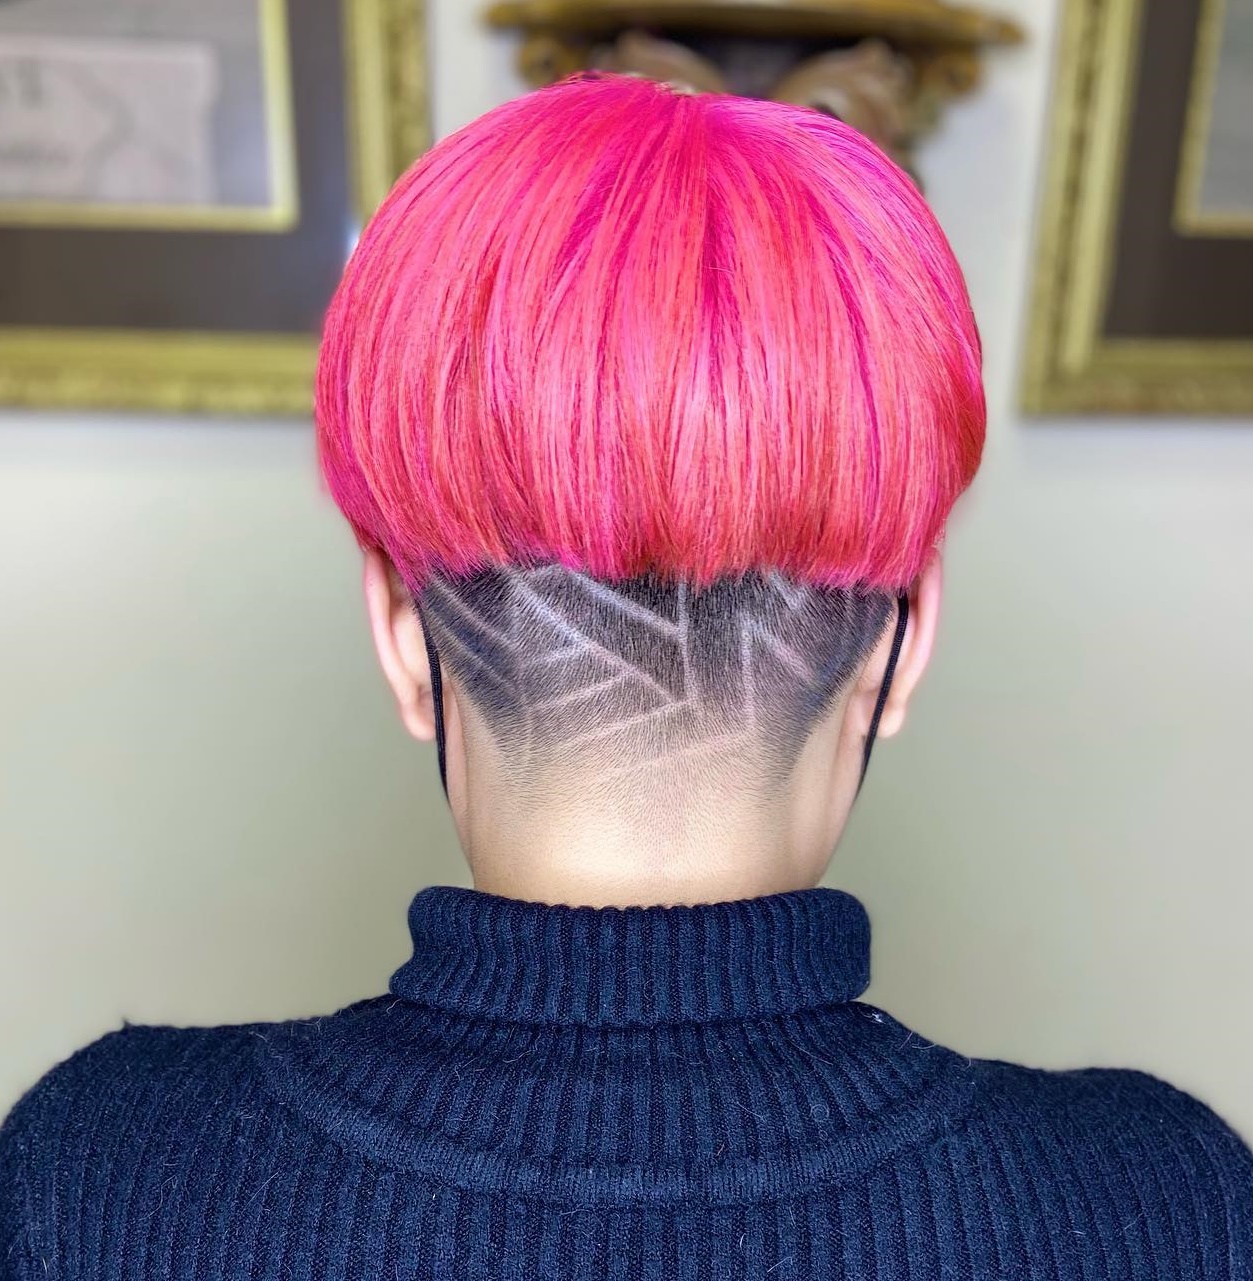 Neon Pink Bowl Hairstyle with Undercut